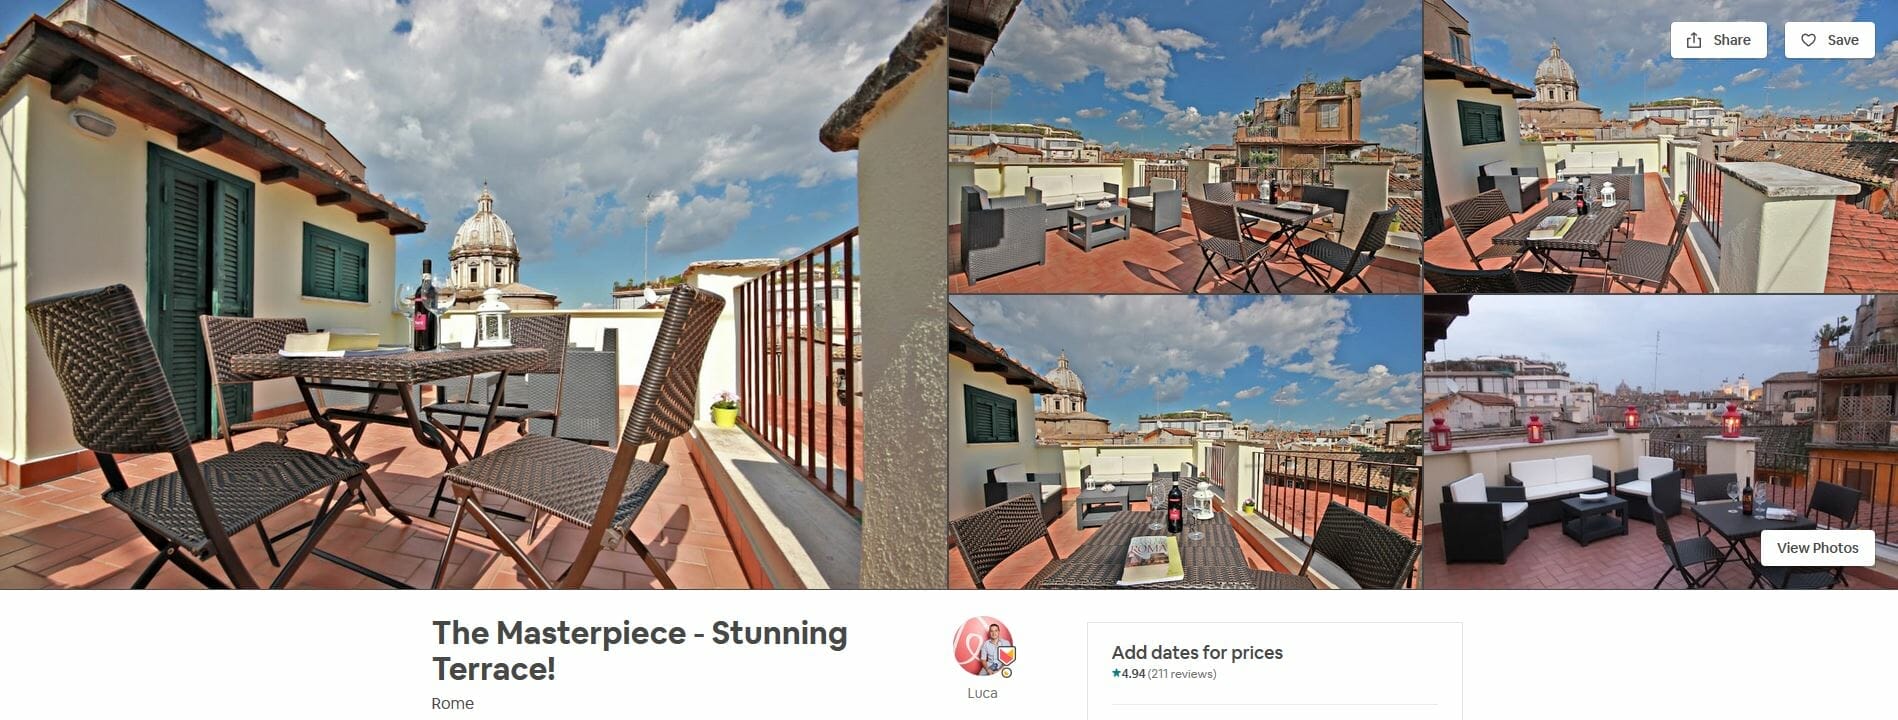 best airbnbs rome The Masterpiece